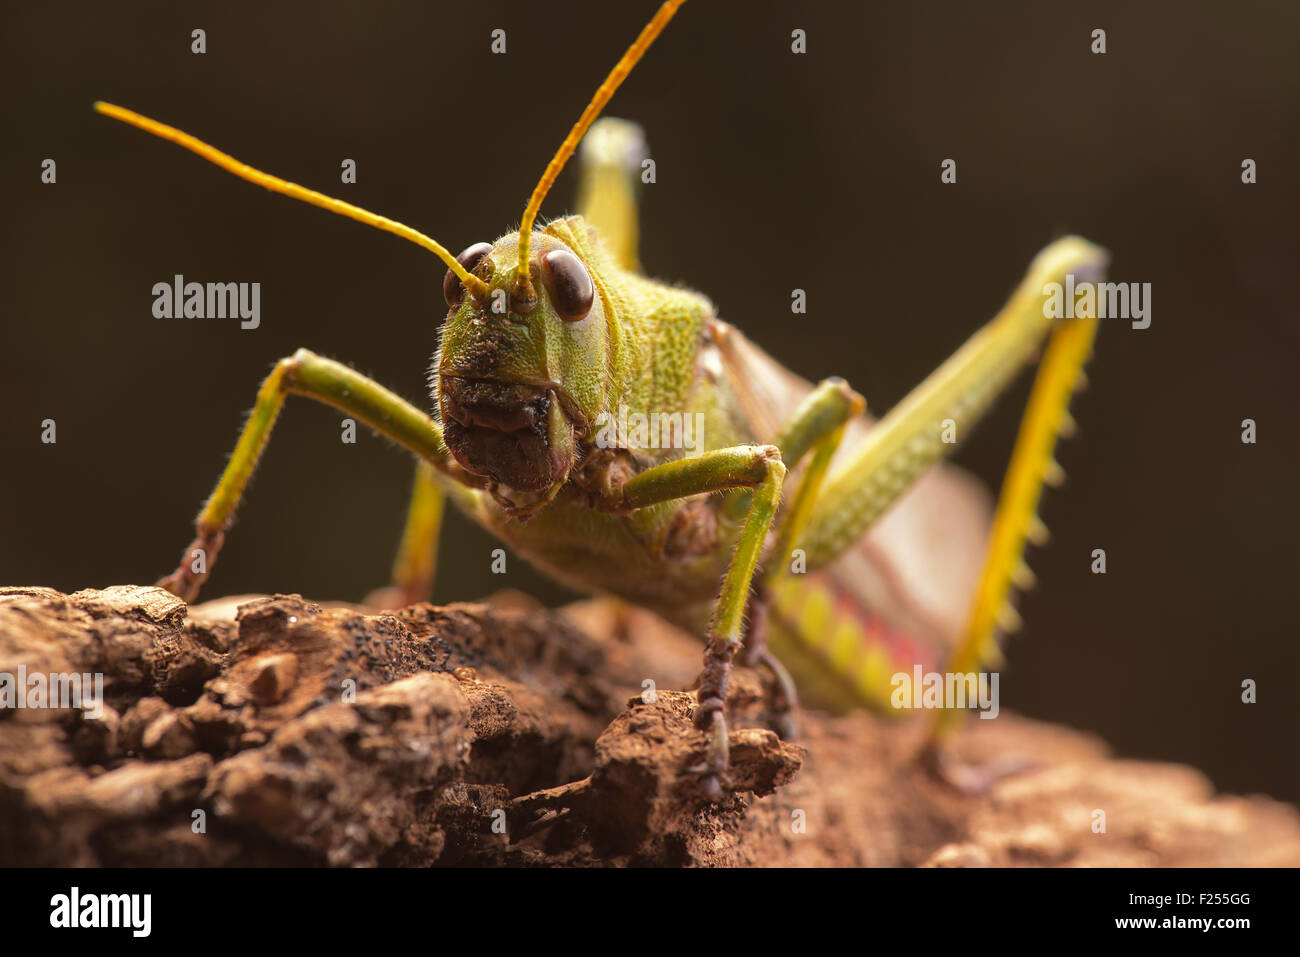 Giant grasshopper on the trunk of a tree. Stock Photo